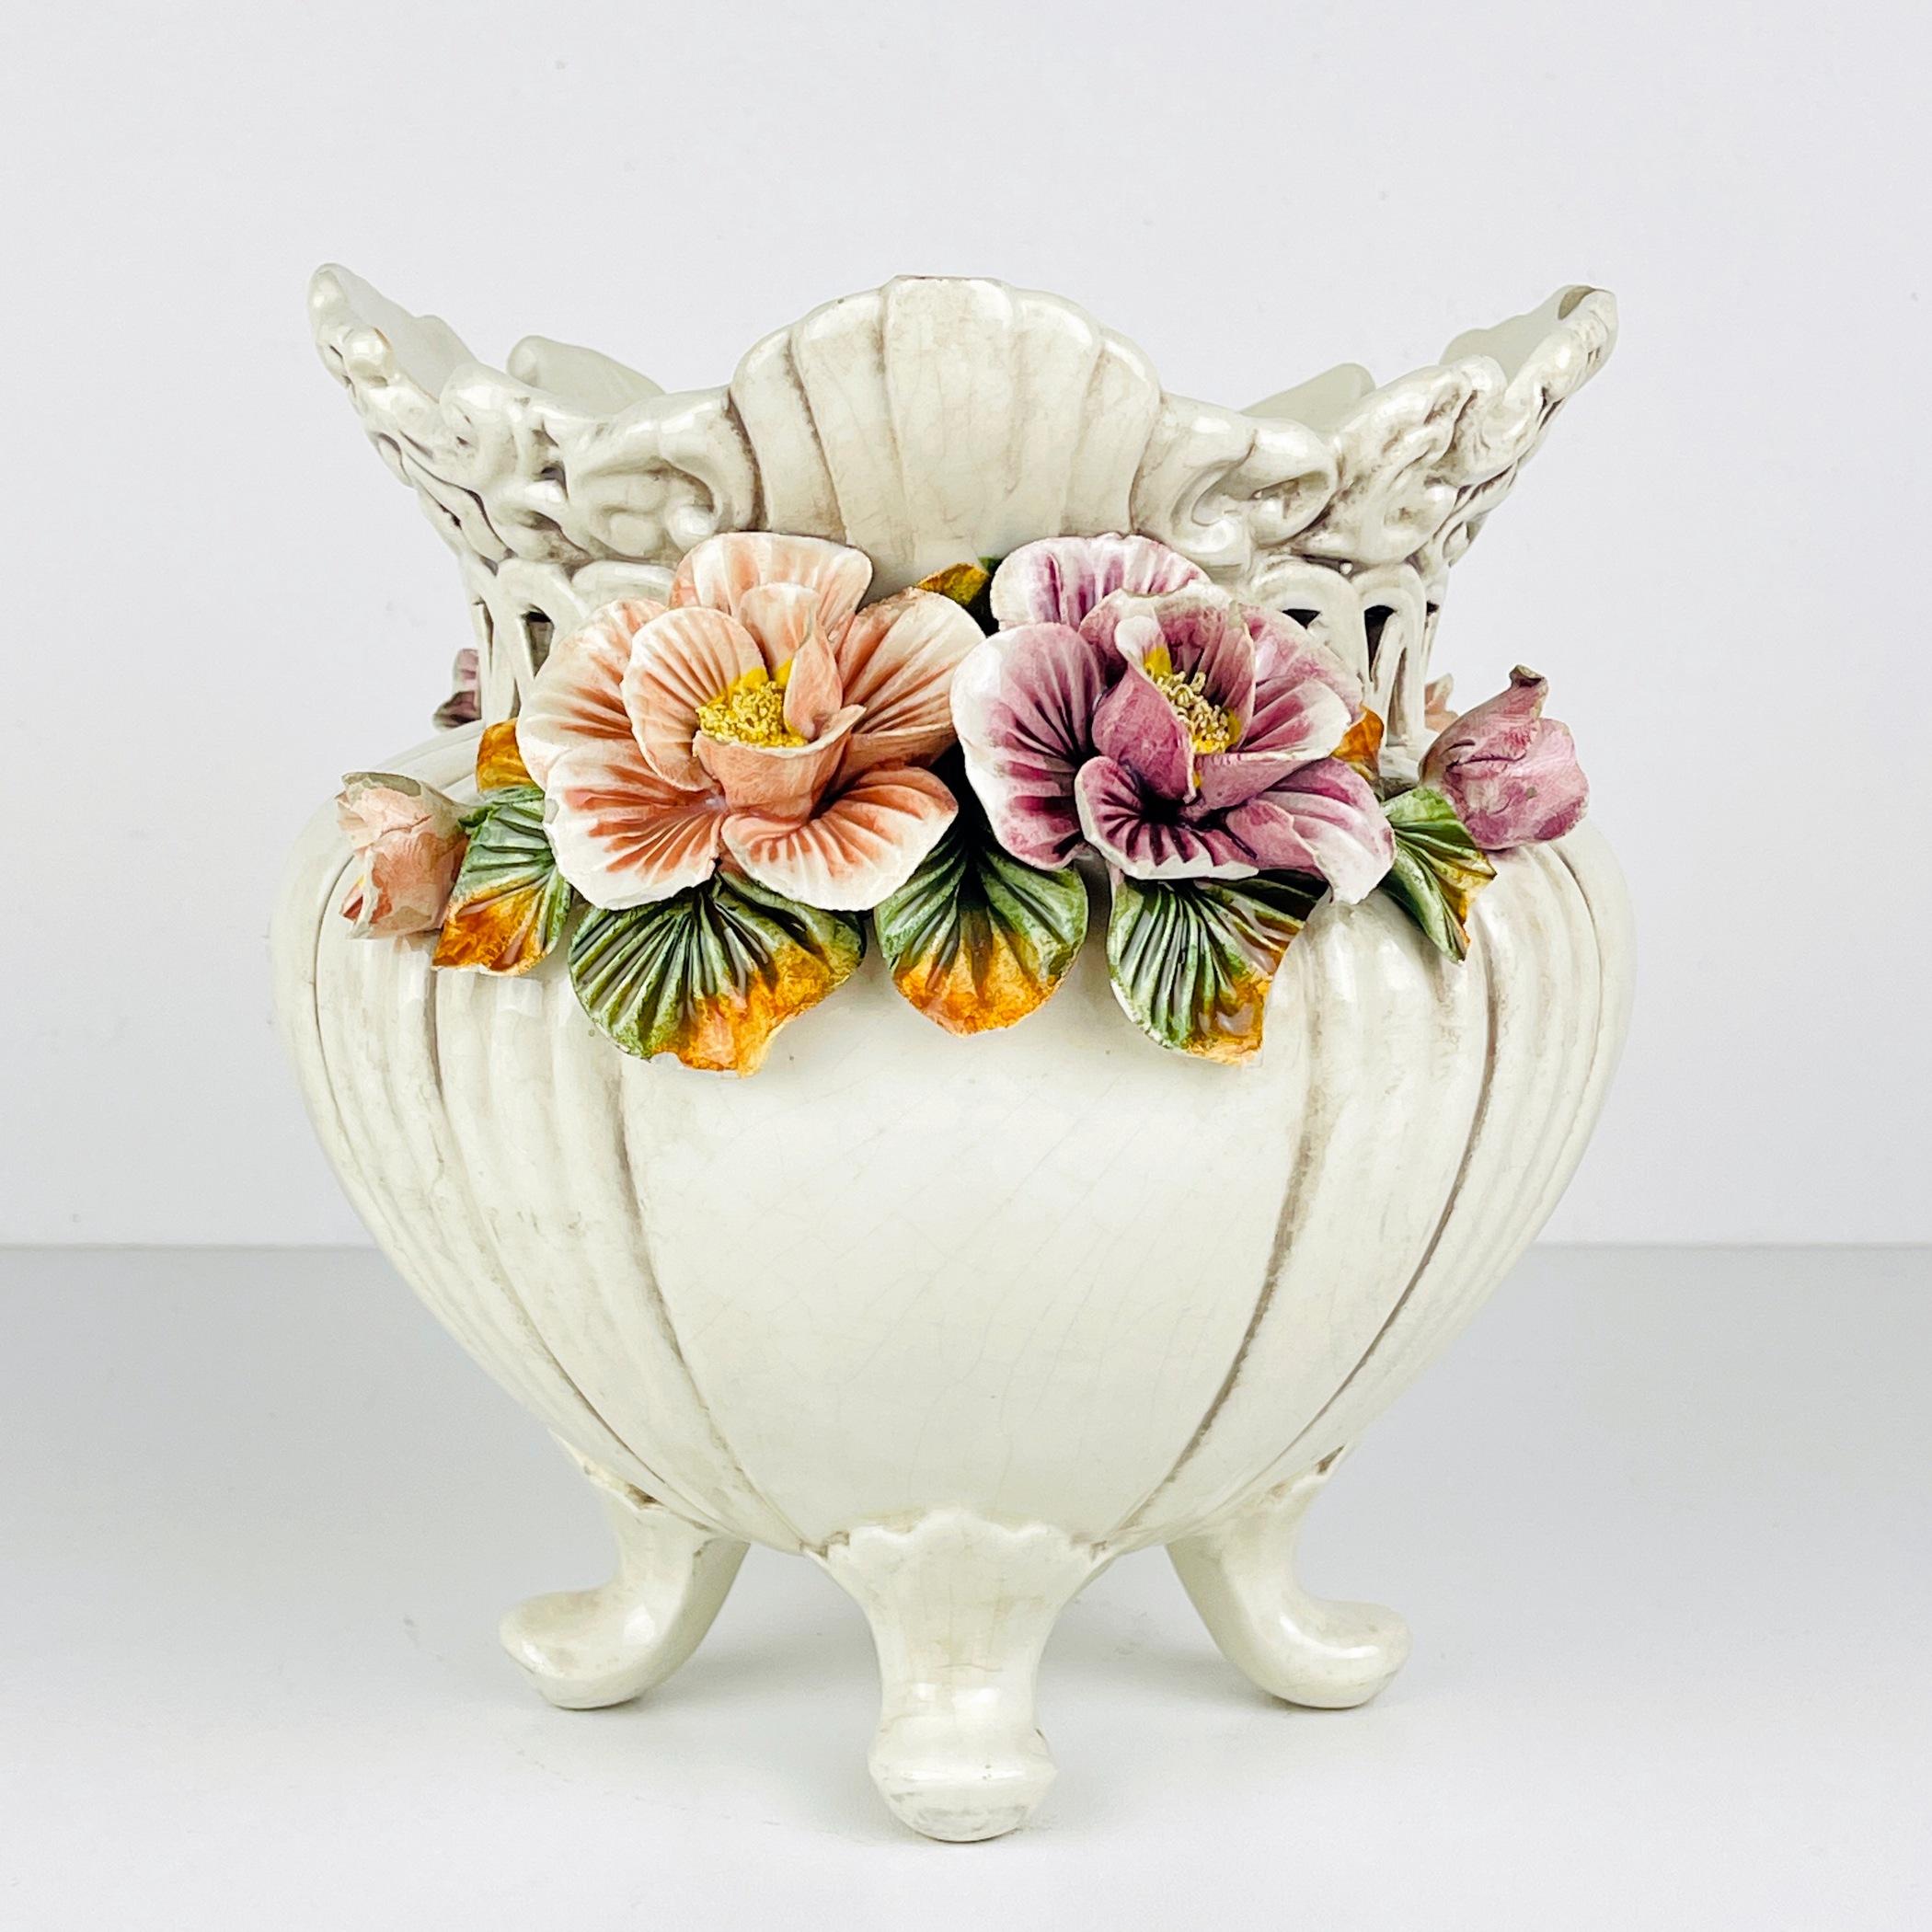 Introducing the ESTE ceramics vase with flowers, Italy 1950s – a true masterpiece steeped in history and centuries-old heritage. Este stands as one of Italy's most renowned pottery towns, its ceramics revered for quality and distinctive style